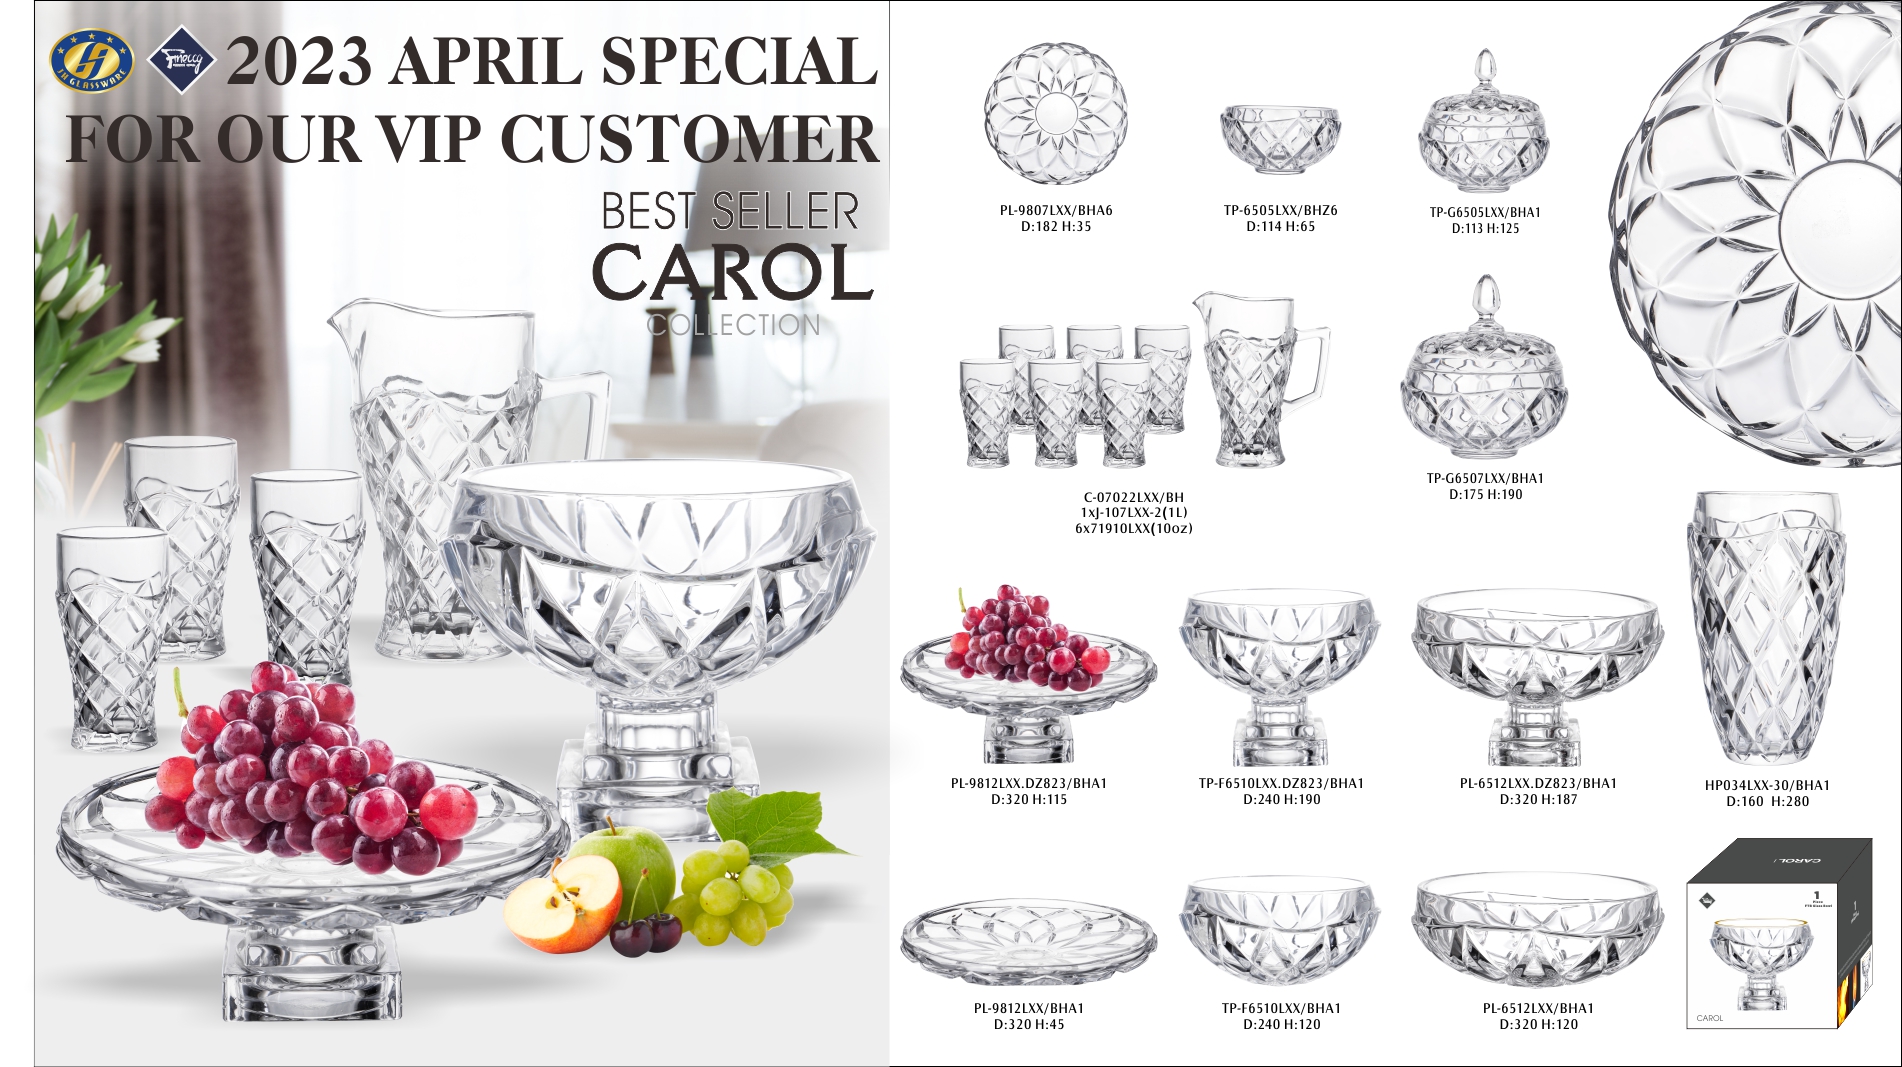 2023 APRIL SPECIAL FOR OUR VIP CUSTOMER